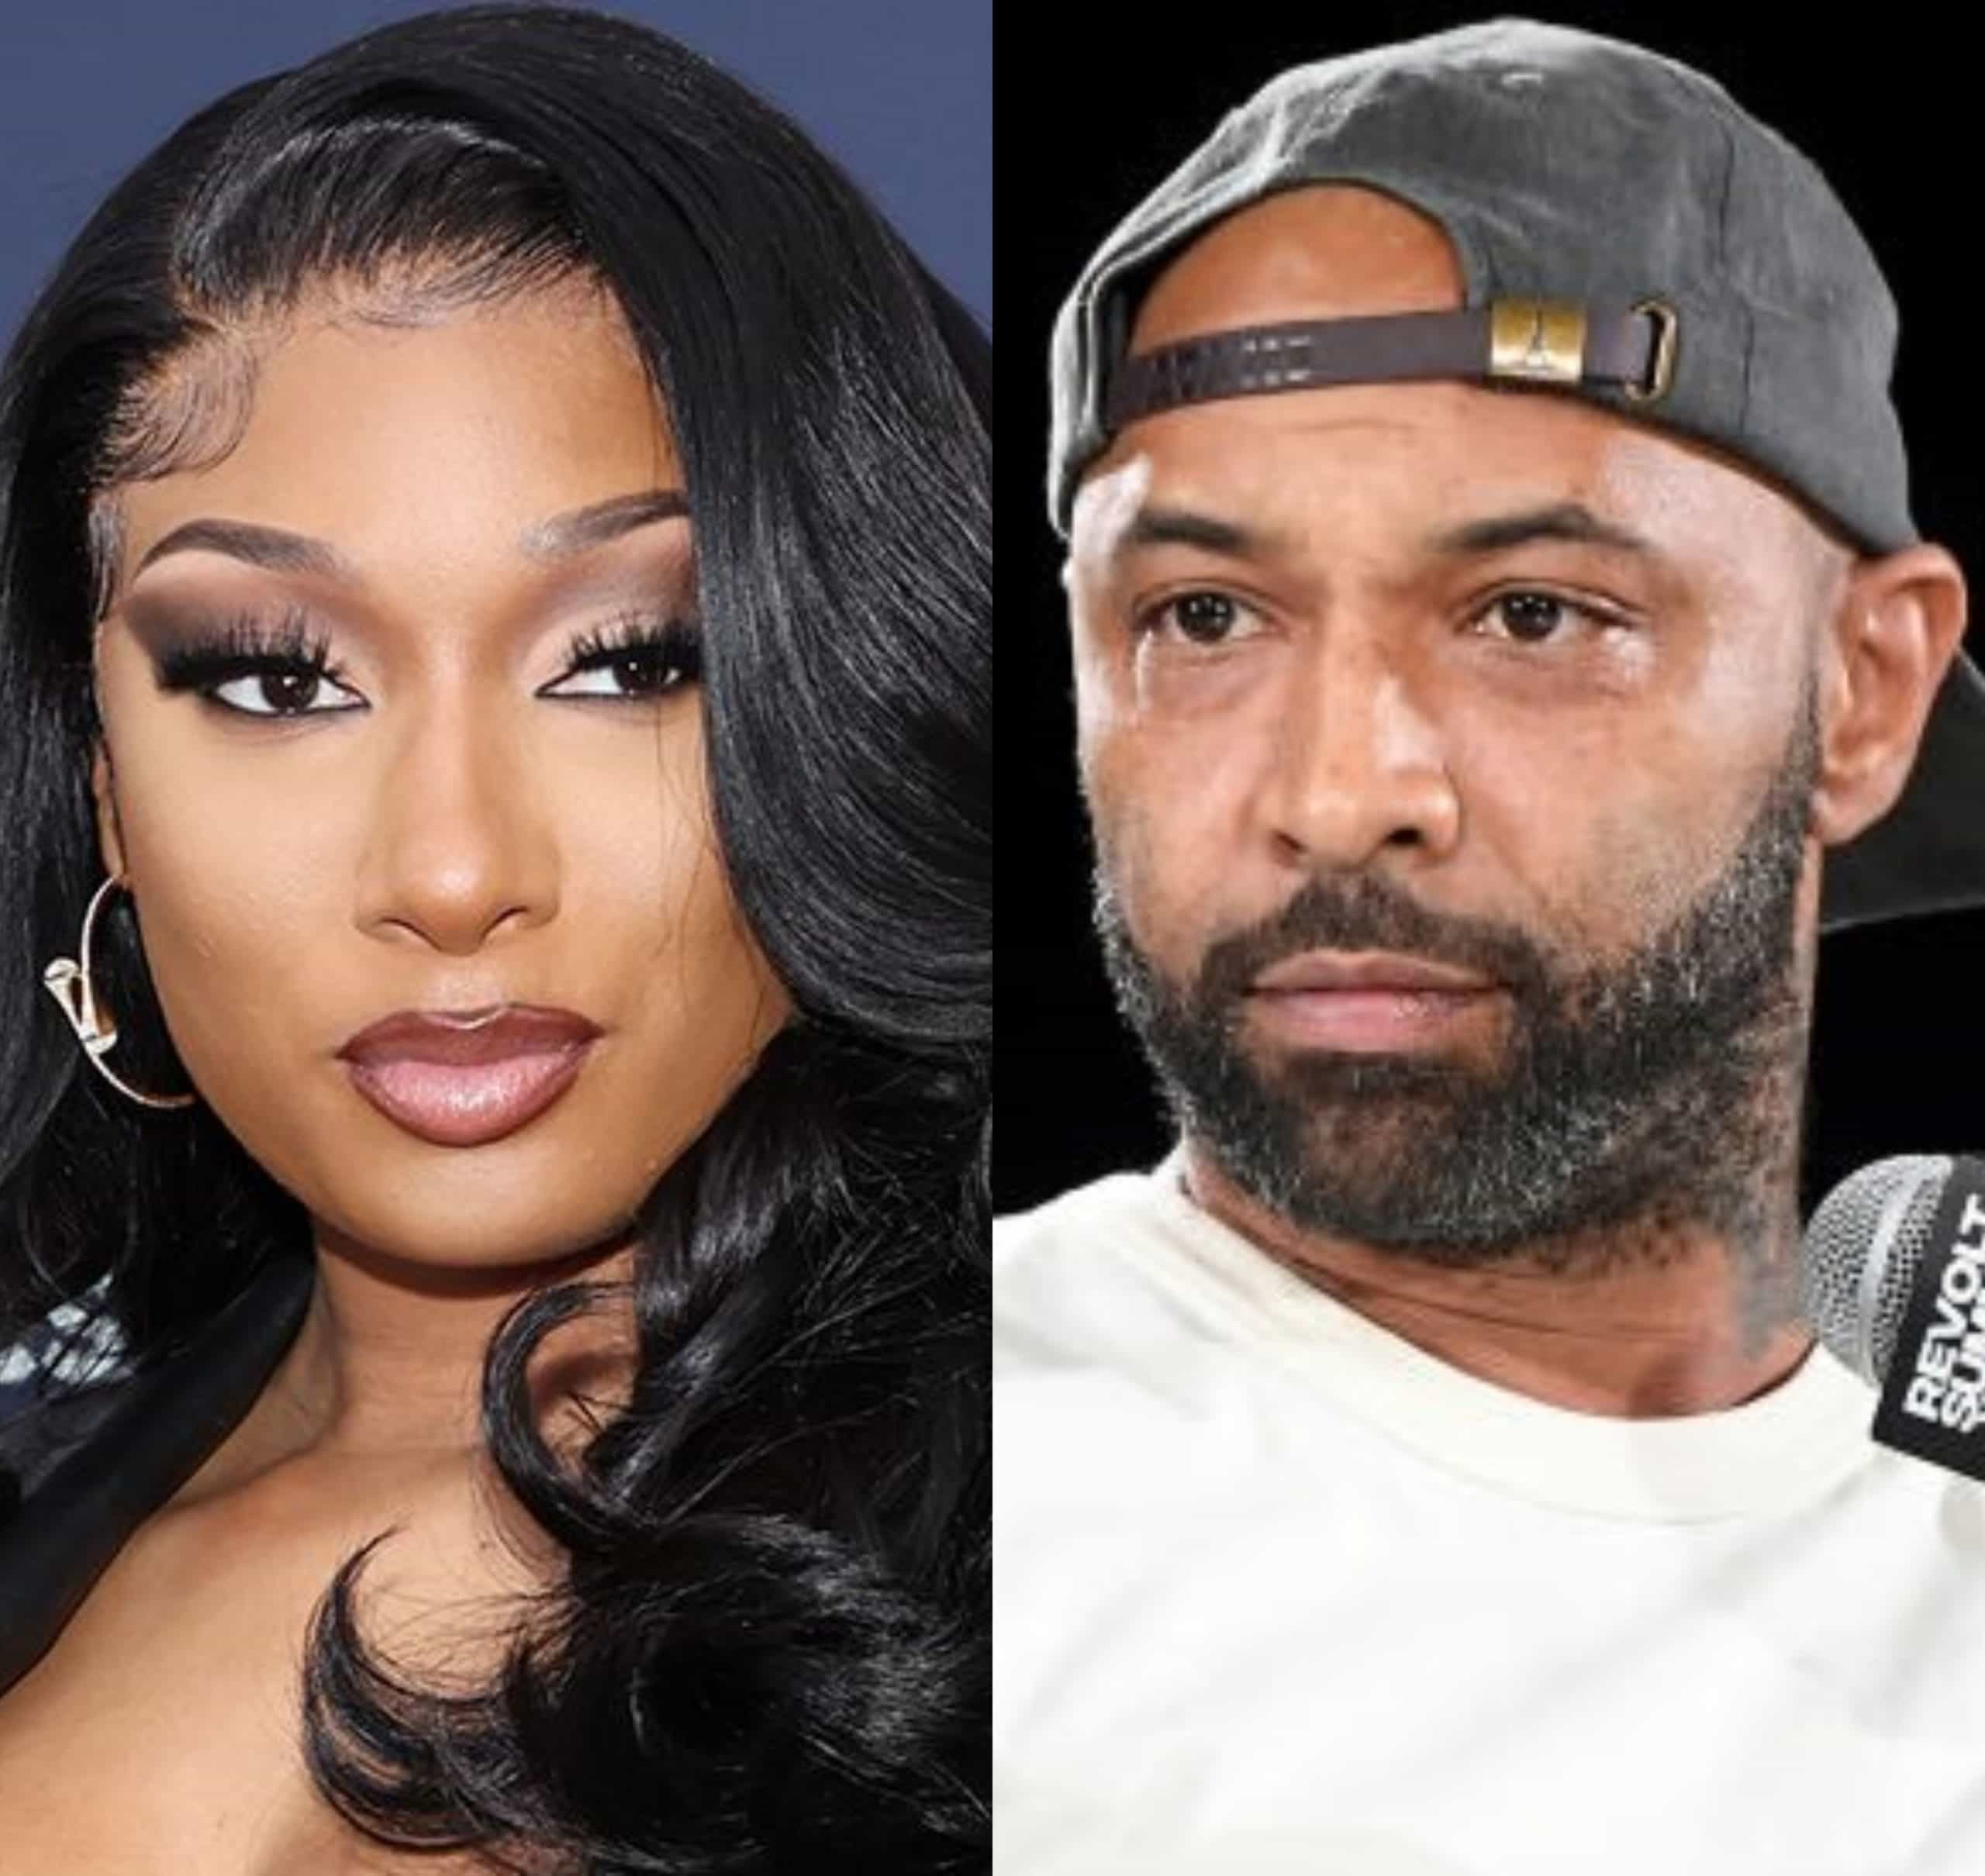 Joe Budden Says Megan Thee Stallion Is Not A Superstar She Ain't Sold Sht